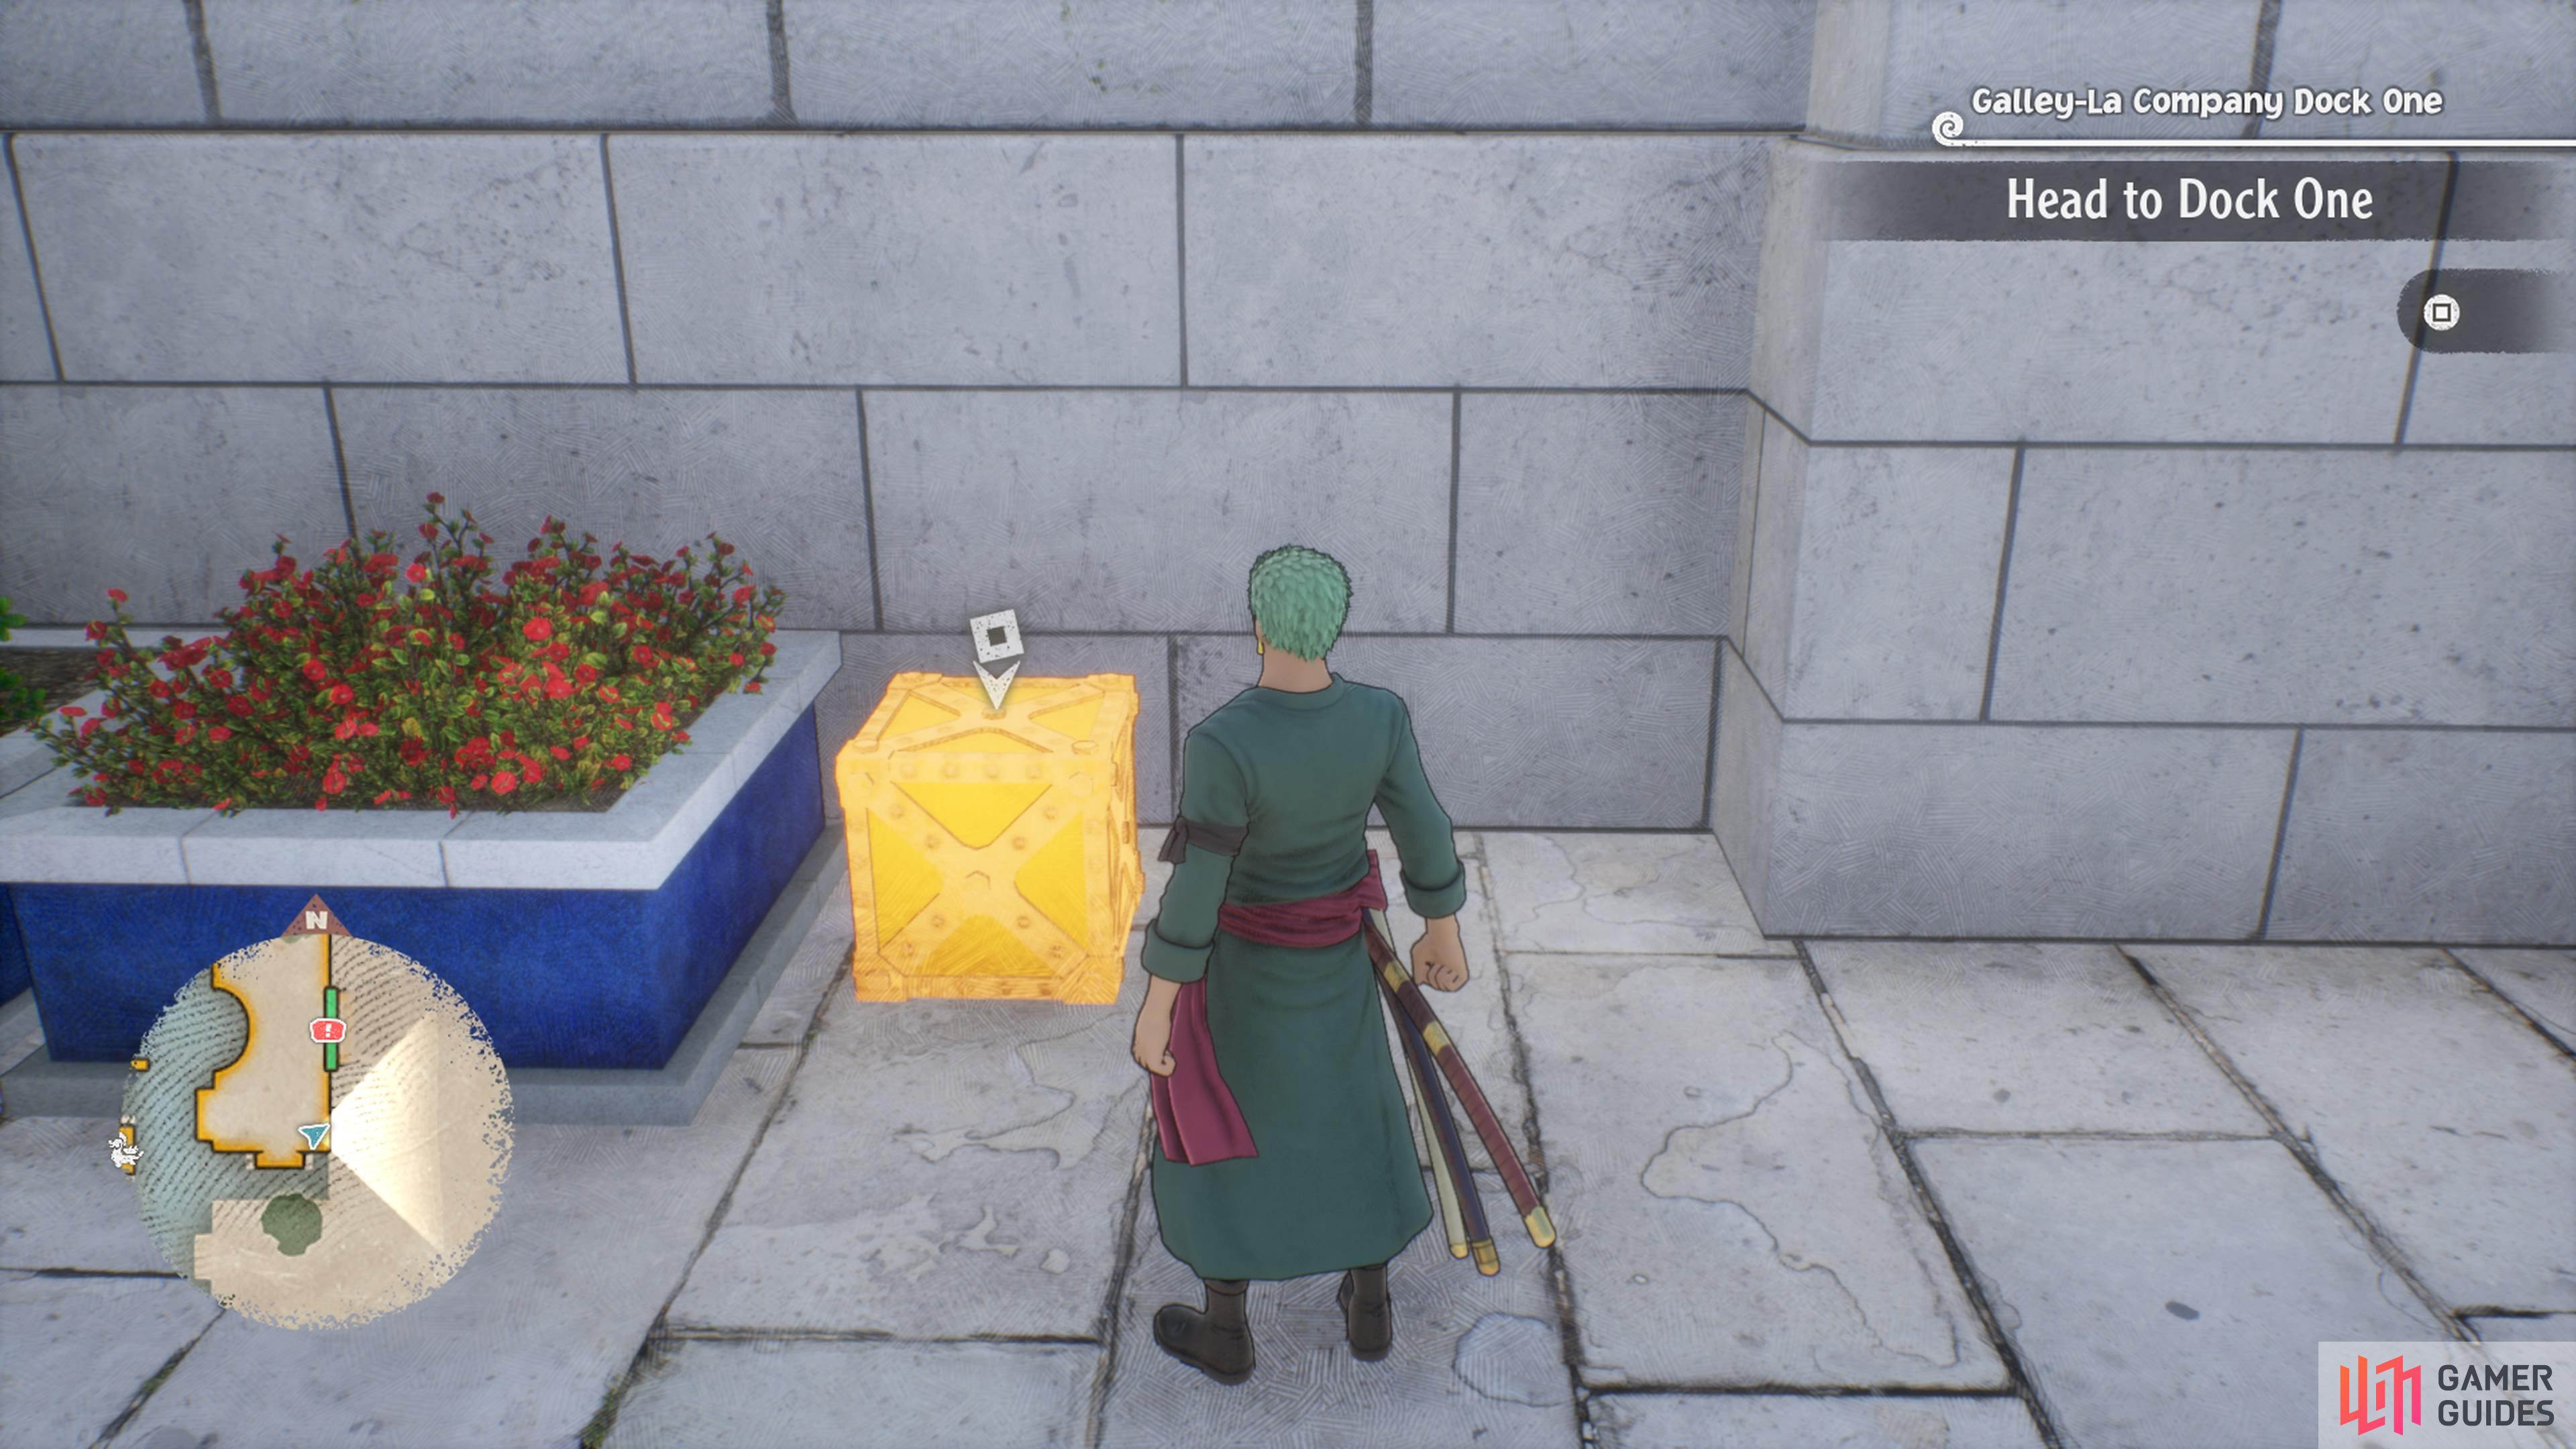 Just south of the Dock One exit is a metal box that requires !Zoro and contains this cube